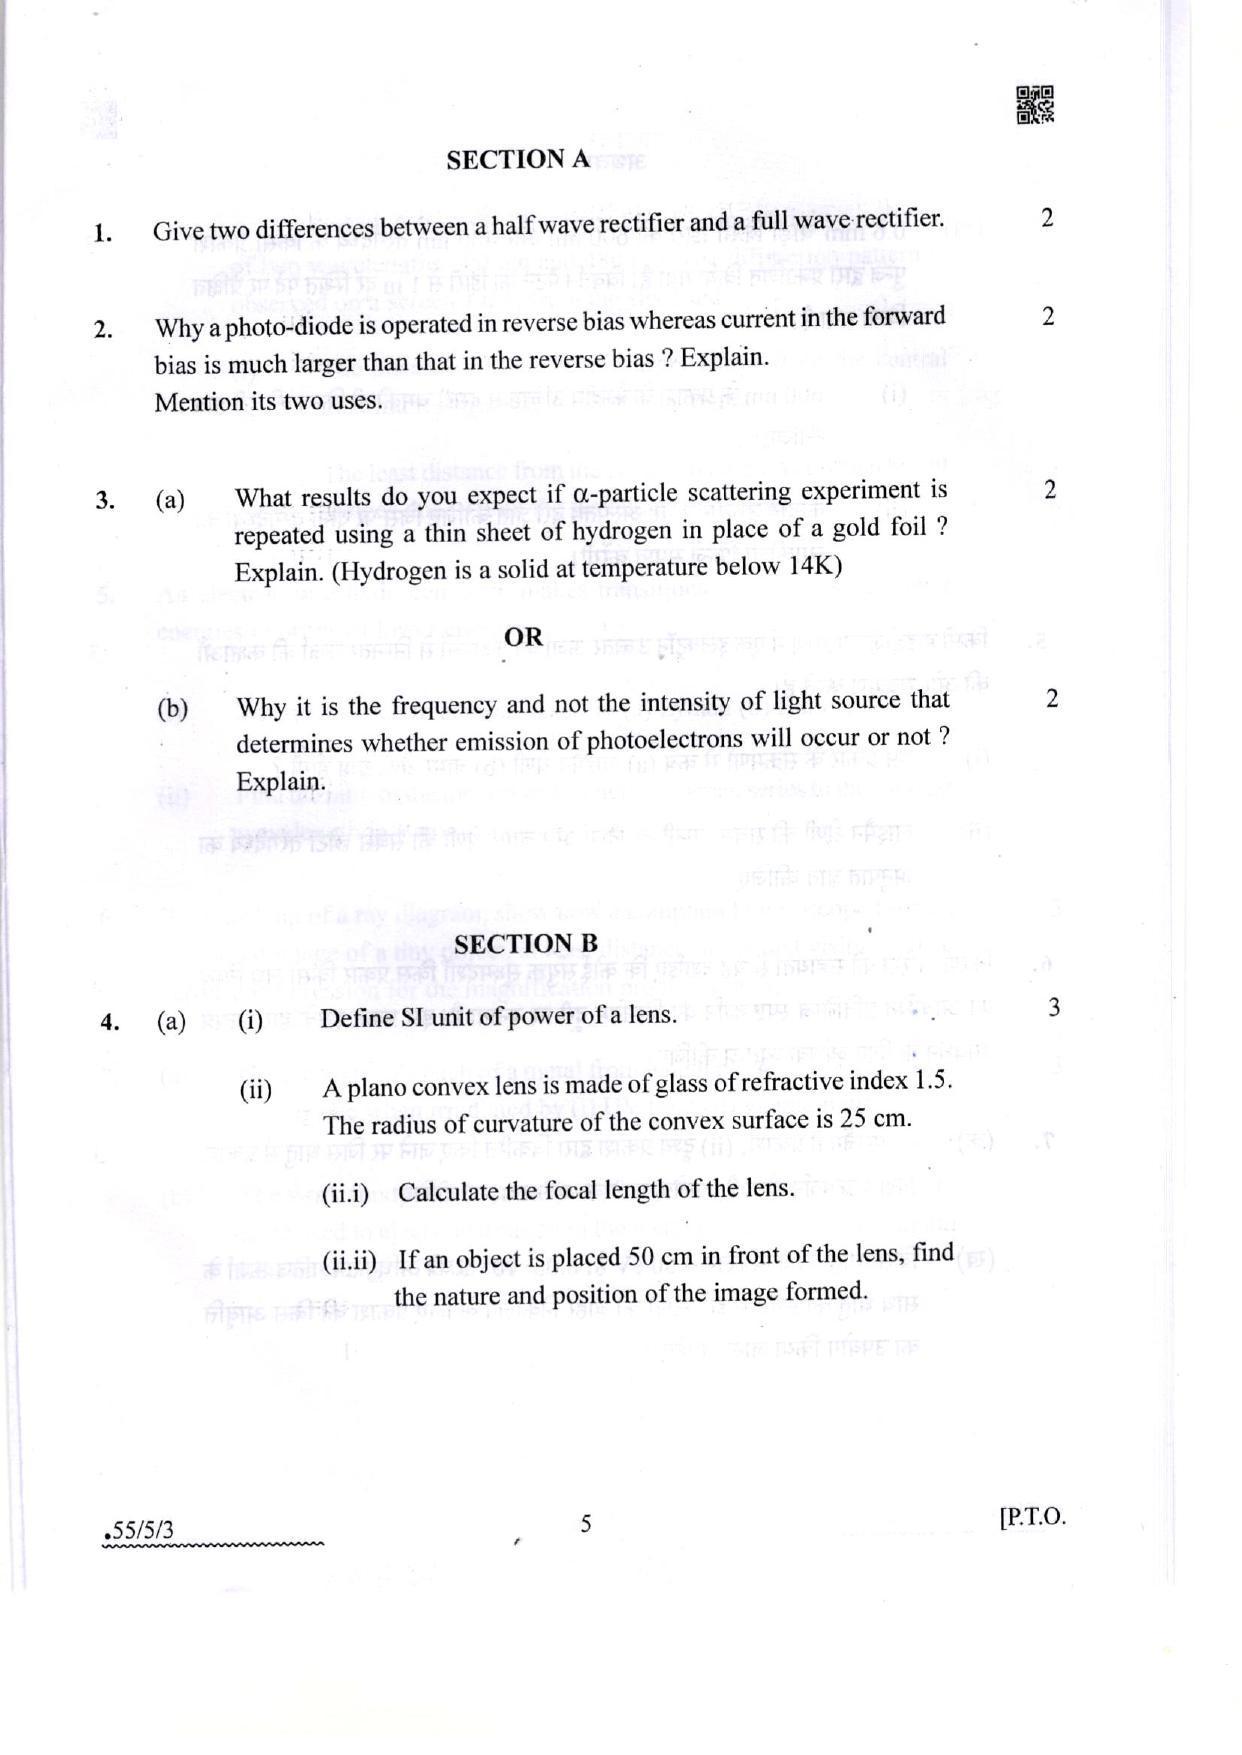 CBSE Class 12 55-5-3 Physics 2022 Question Paper - Page 5